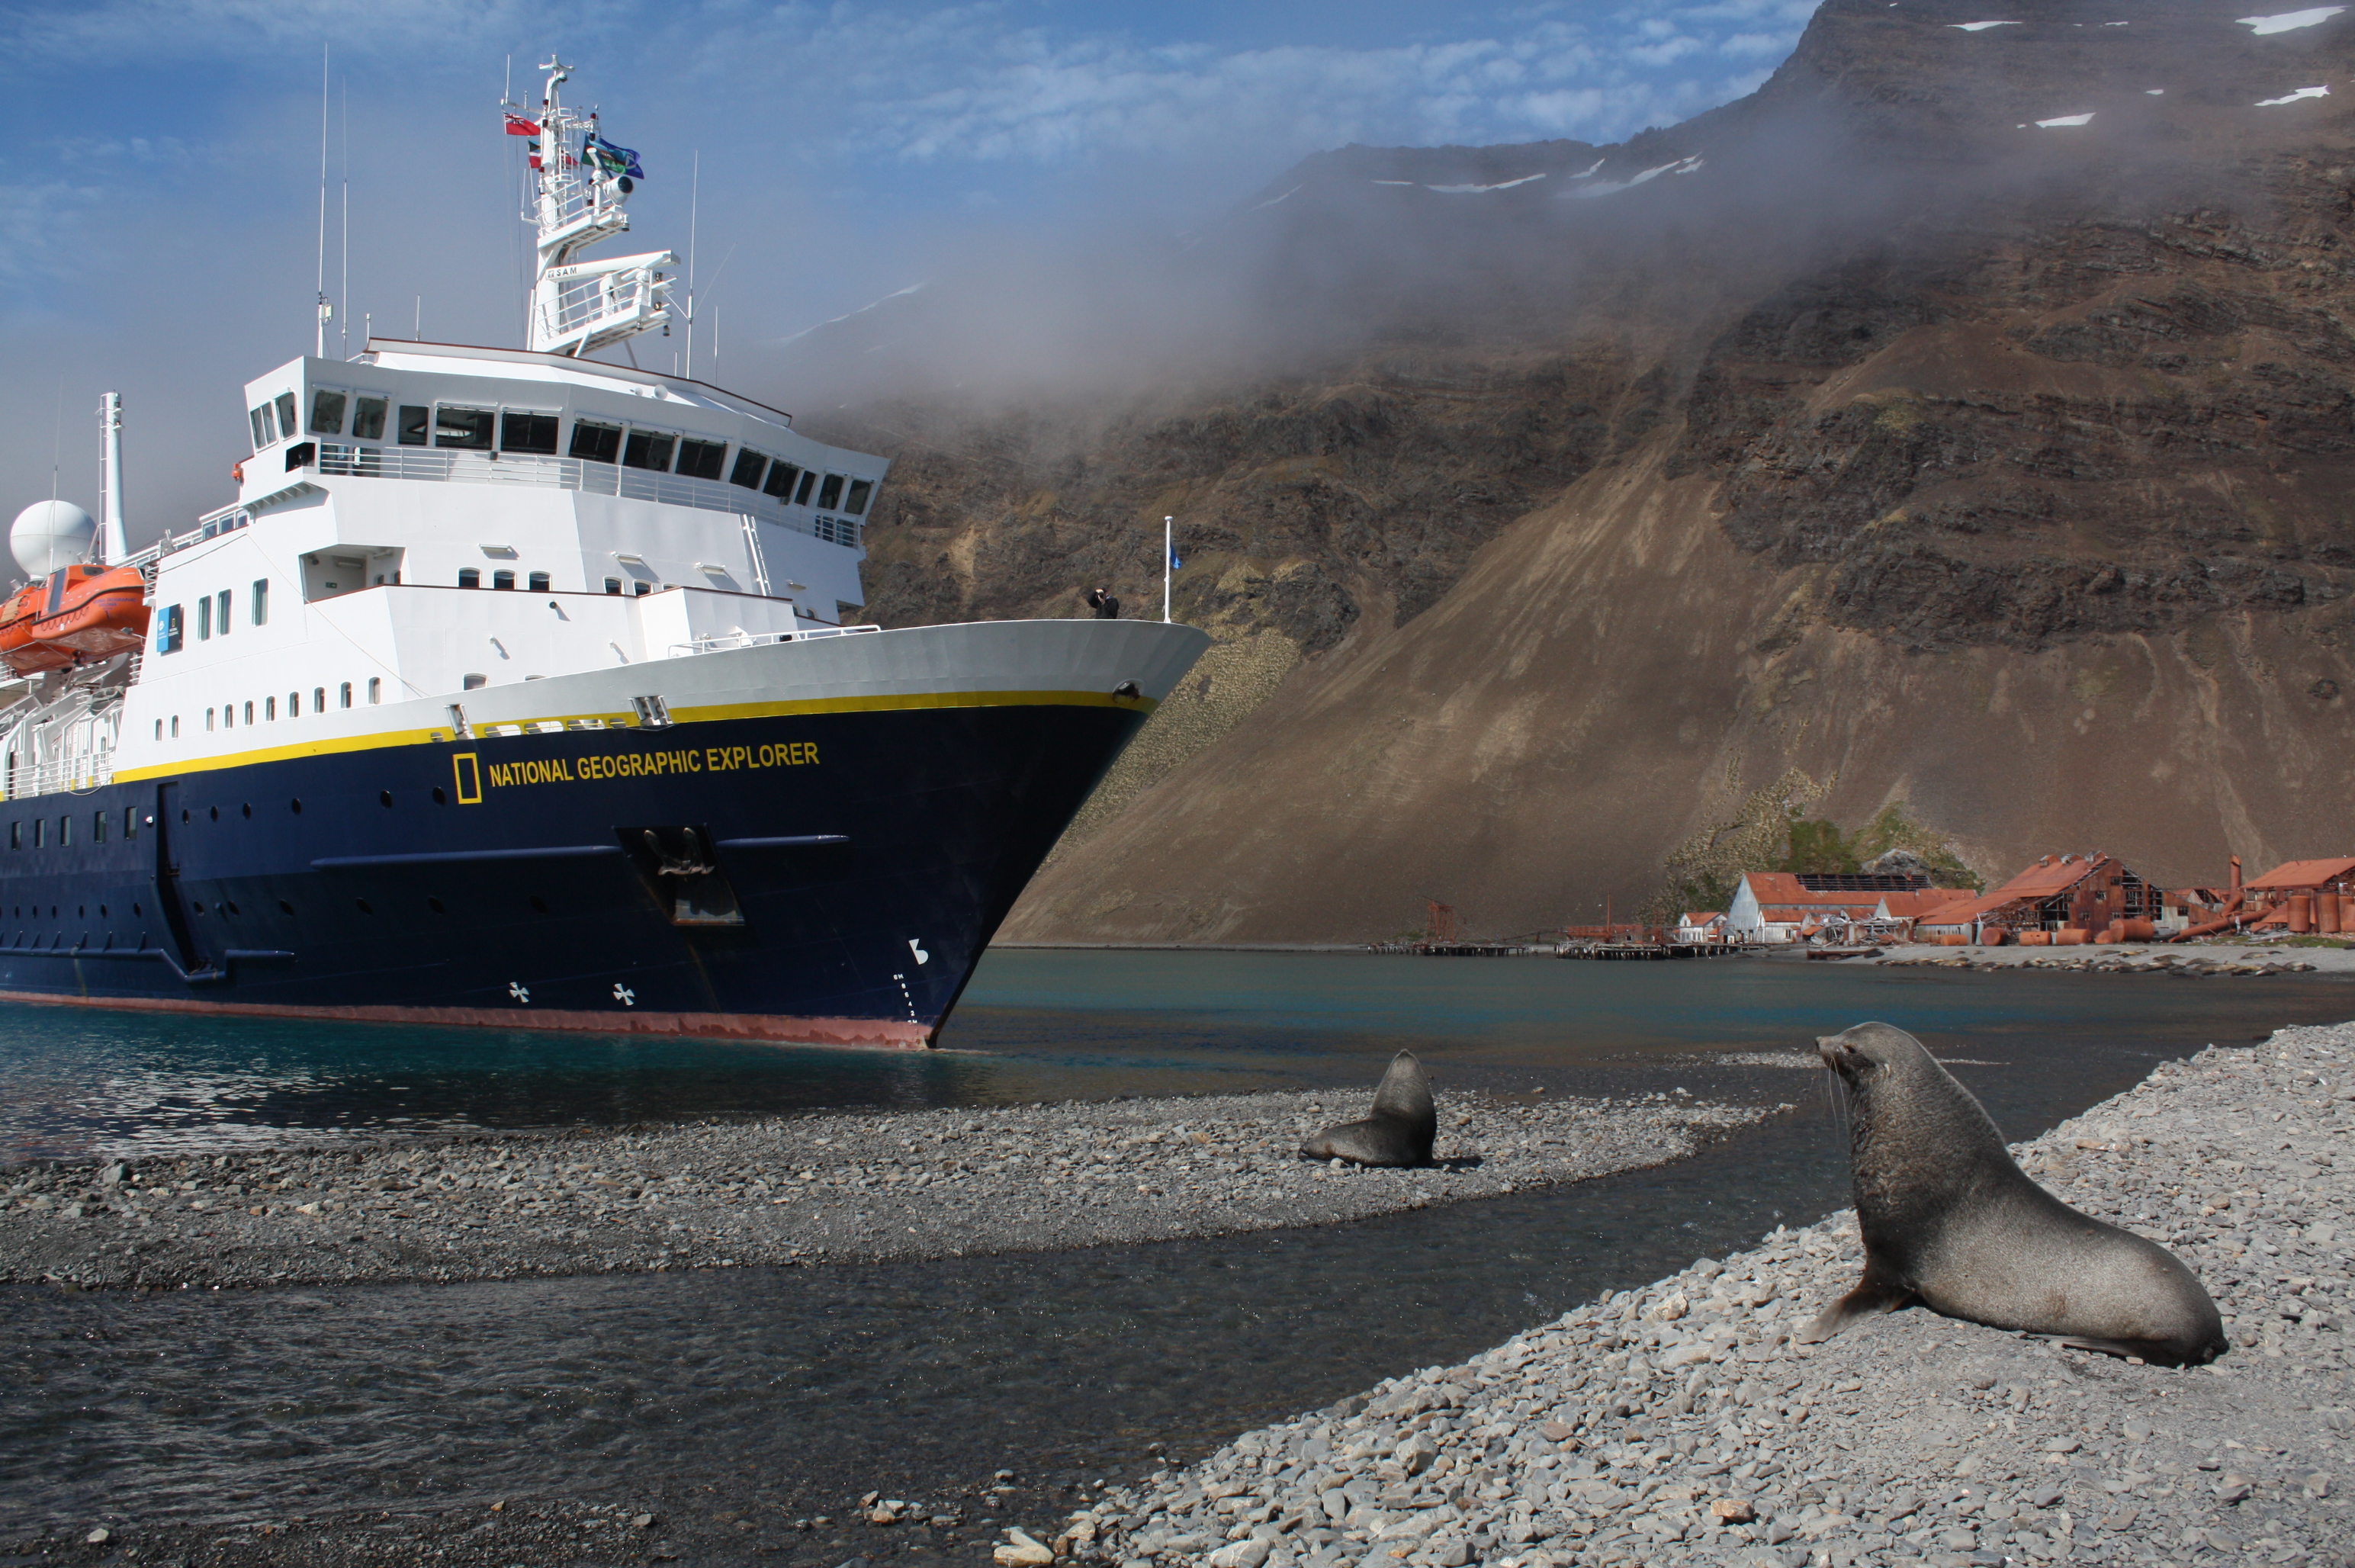 Some cute seals greet the NGEX. Photo: Lindblad Expeditions